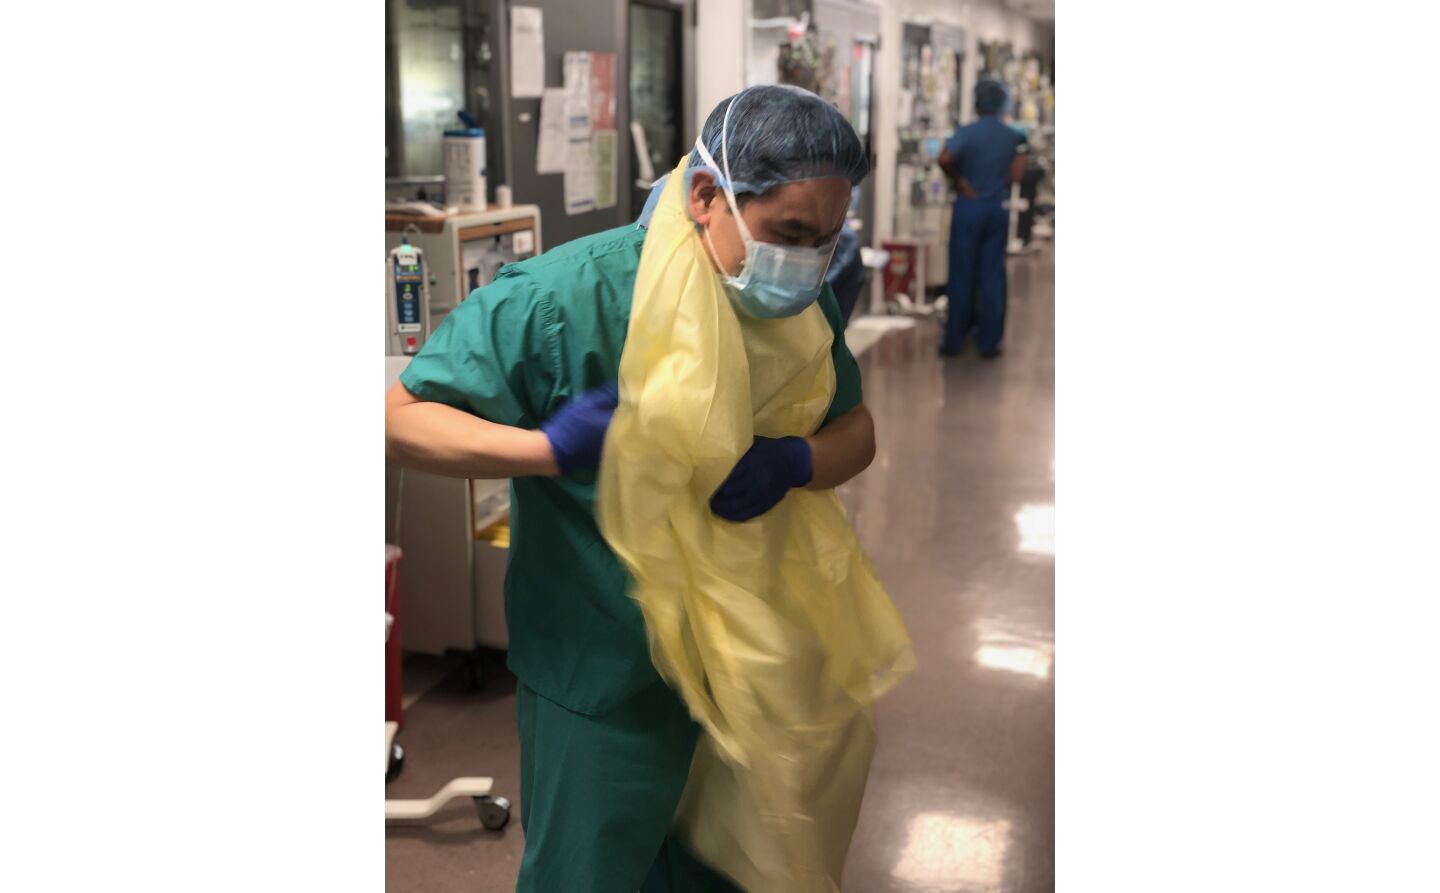 Dr. Glen Chun dons his personal protective equipment